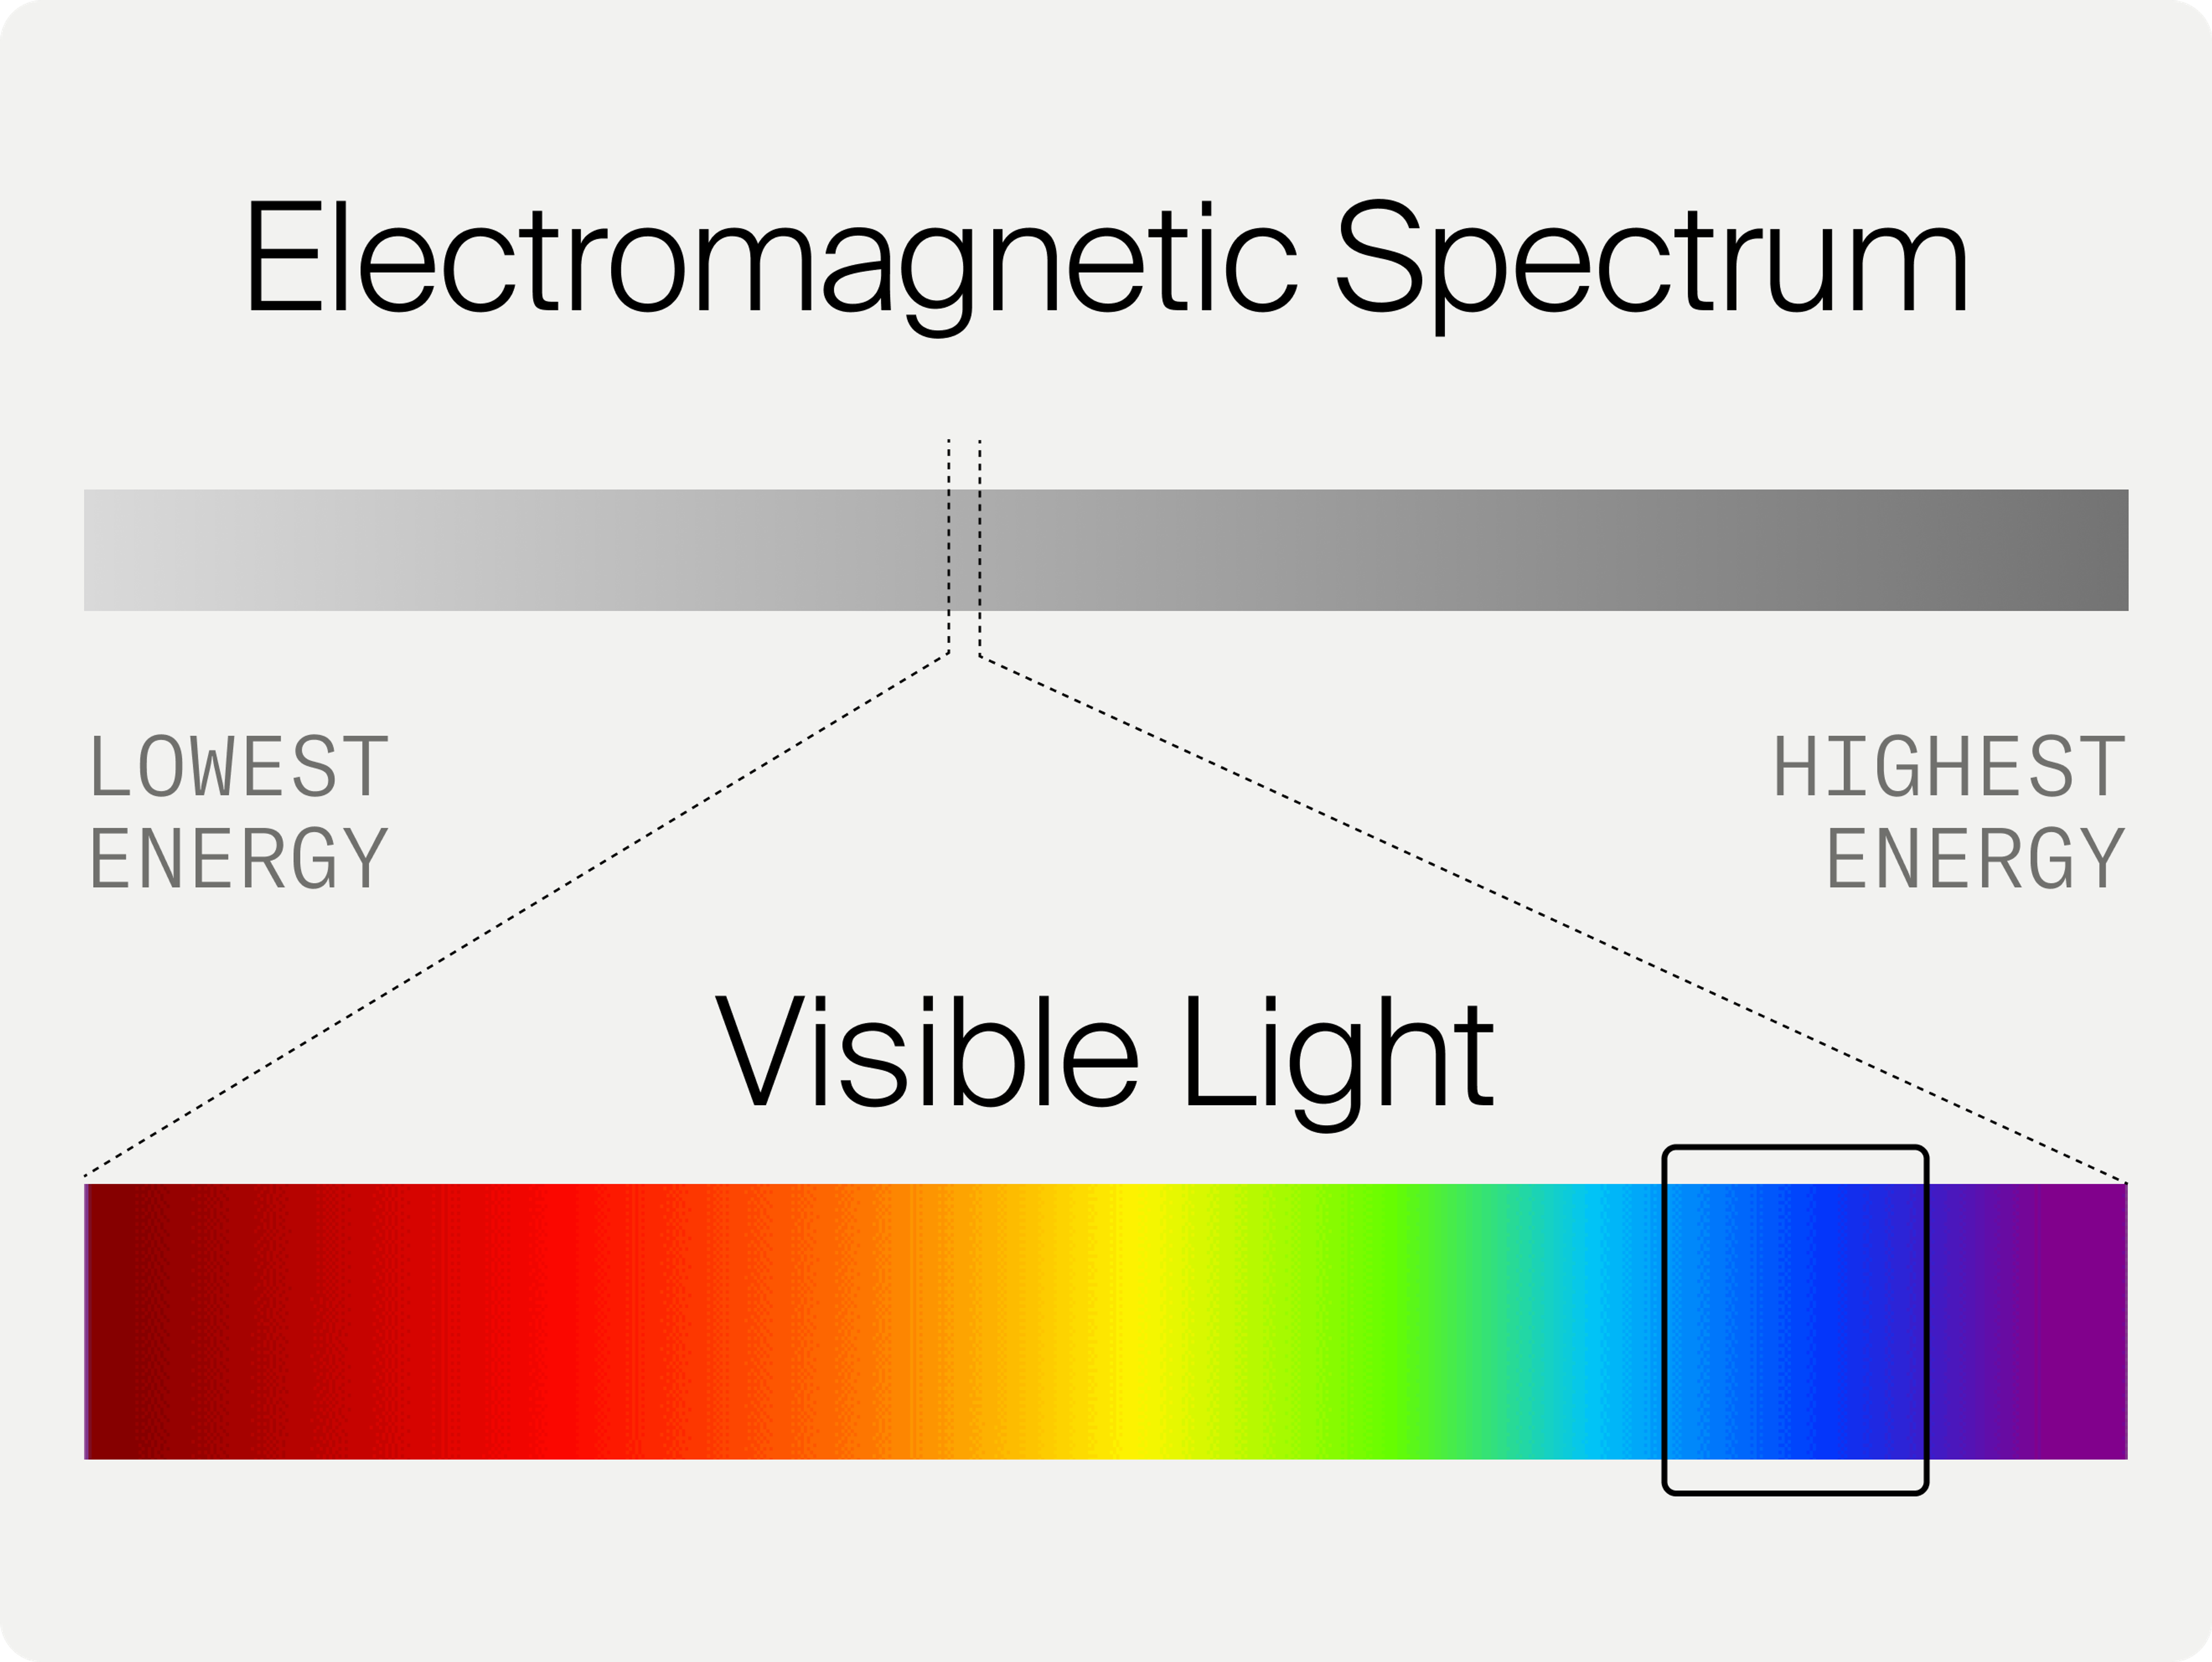 Blue Light and the Electromagnetic Spectrum